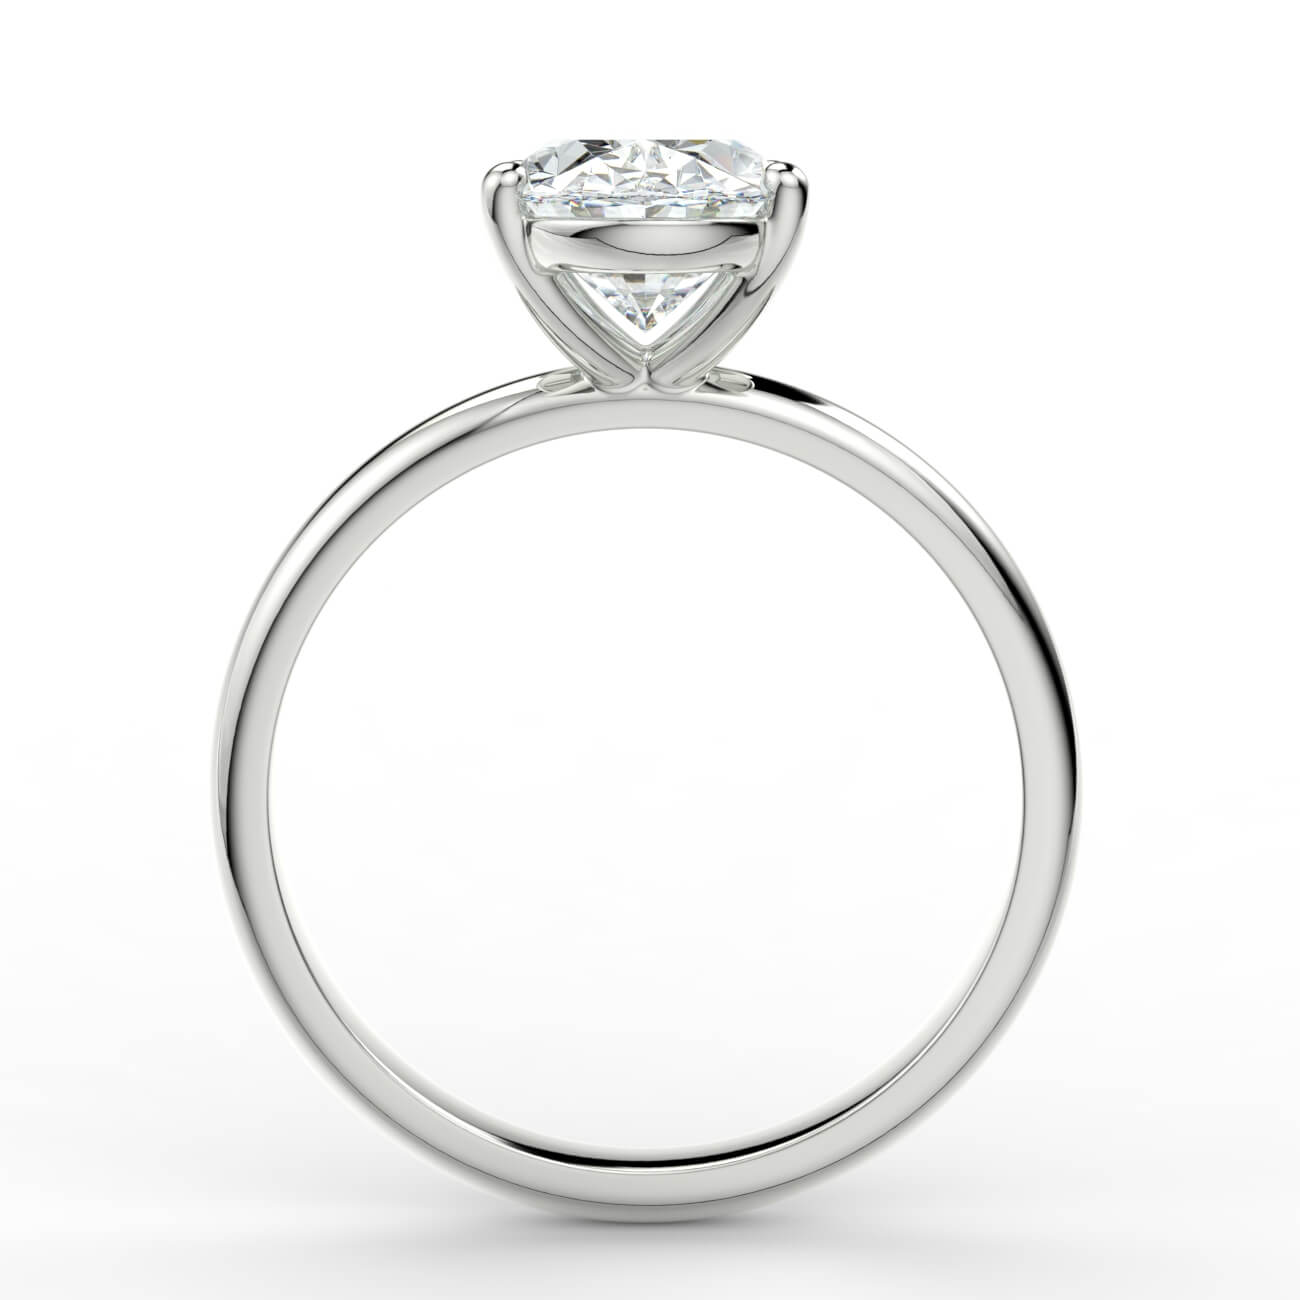 Comfort fit 4 claw oval solitaire diamond ring in white gold – Australian Diamond Network